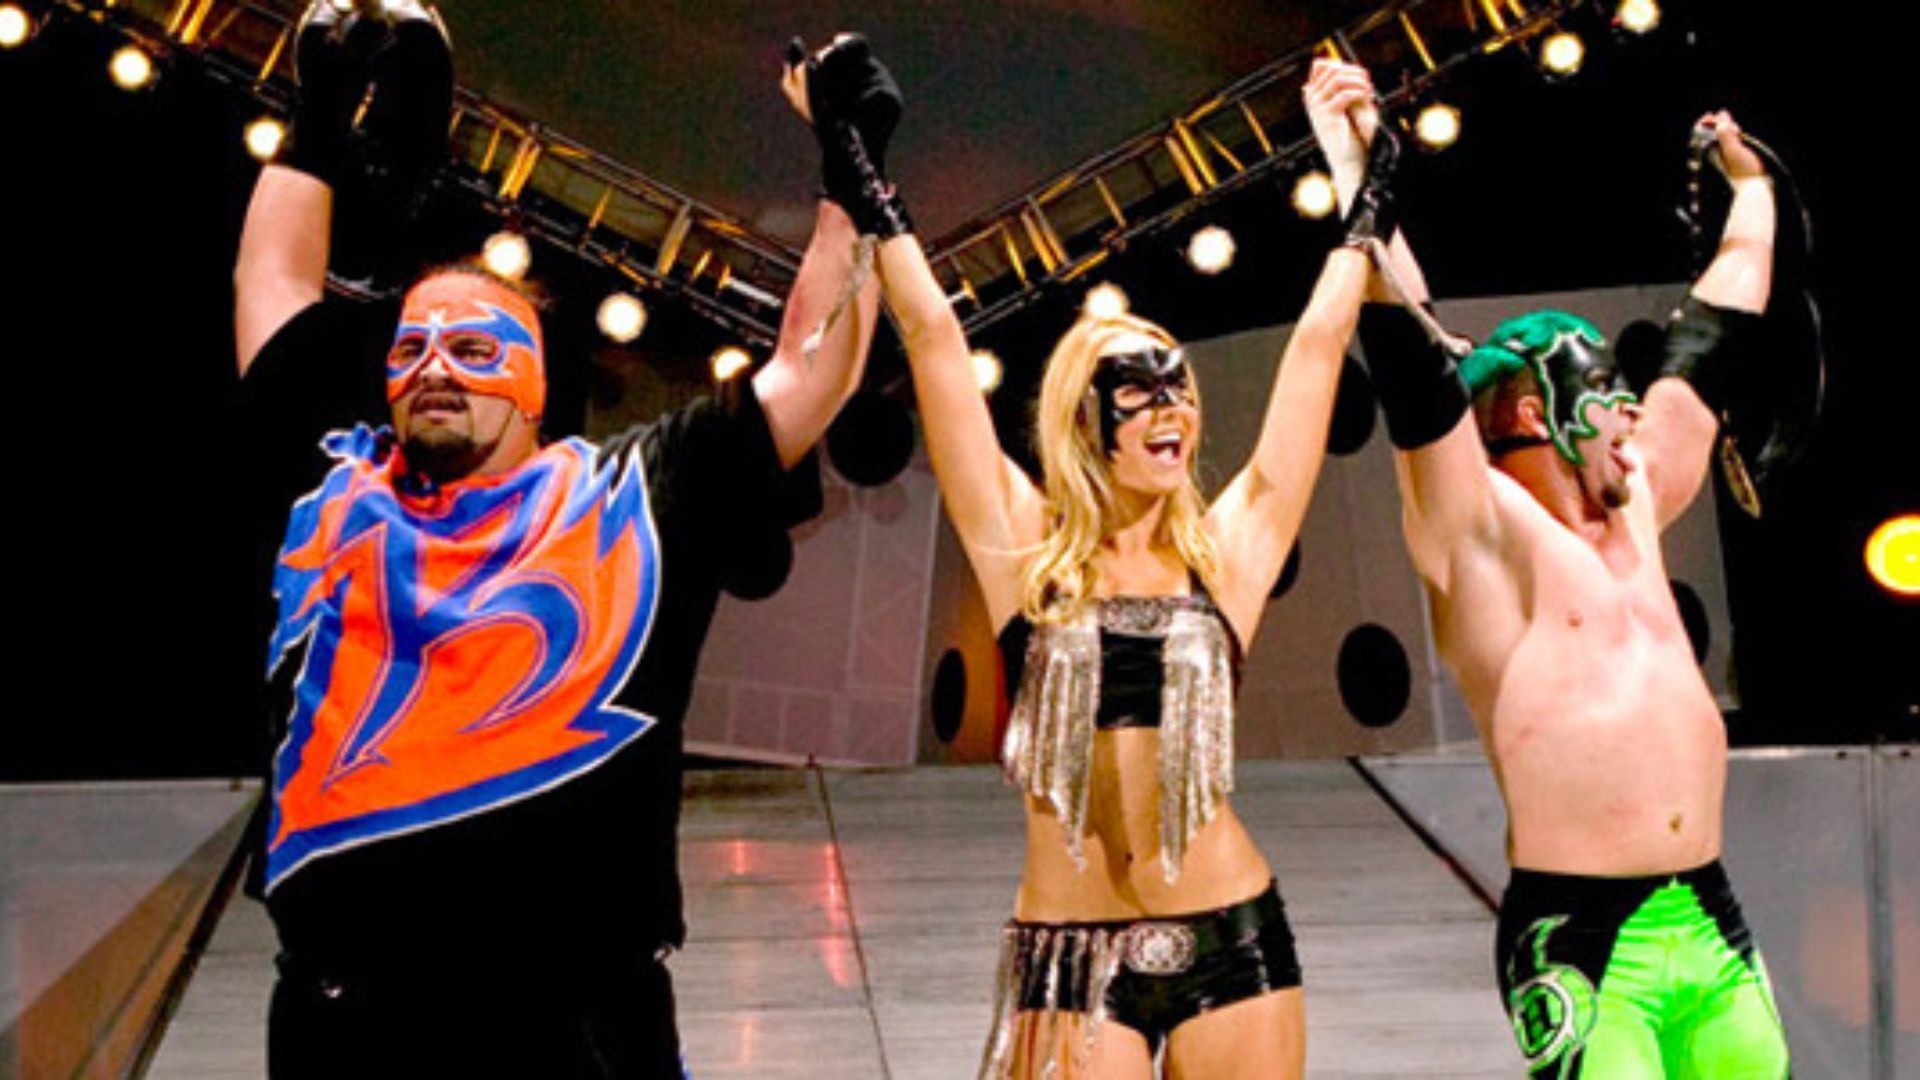 Rosey with Stacy Keibler and The Hurricane